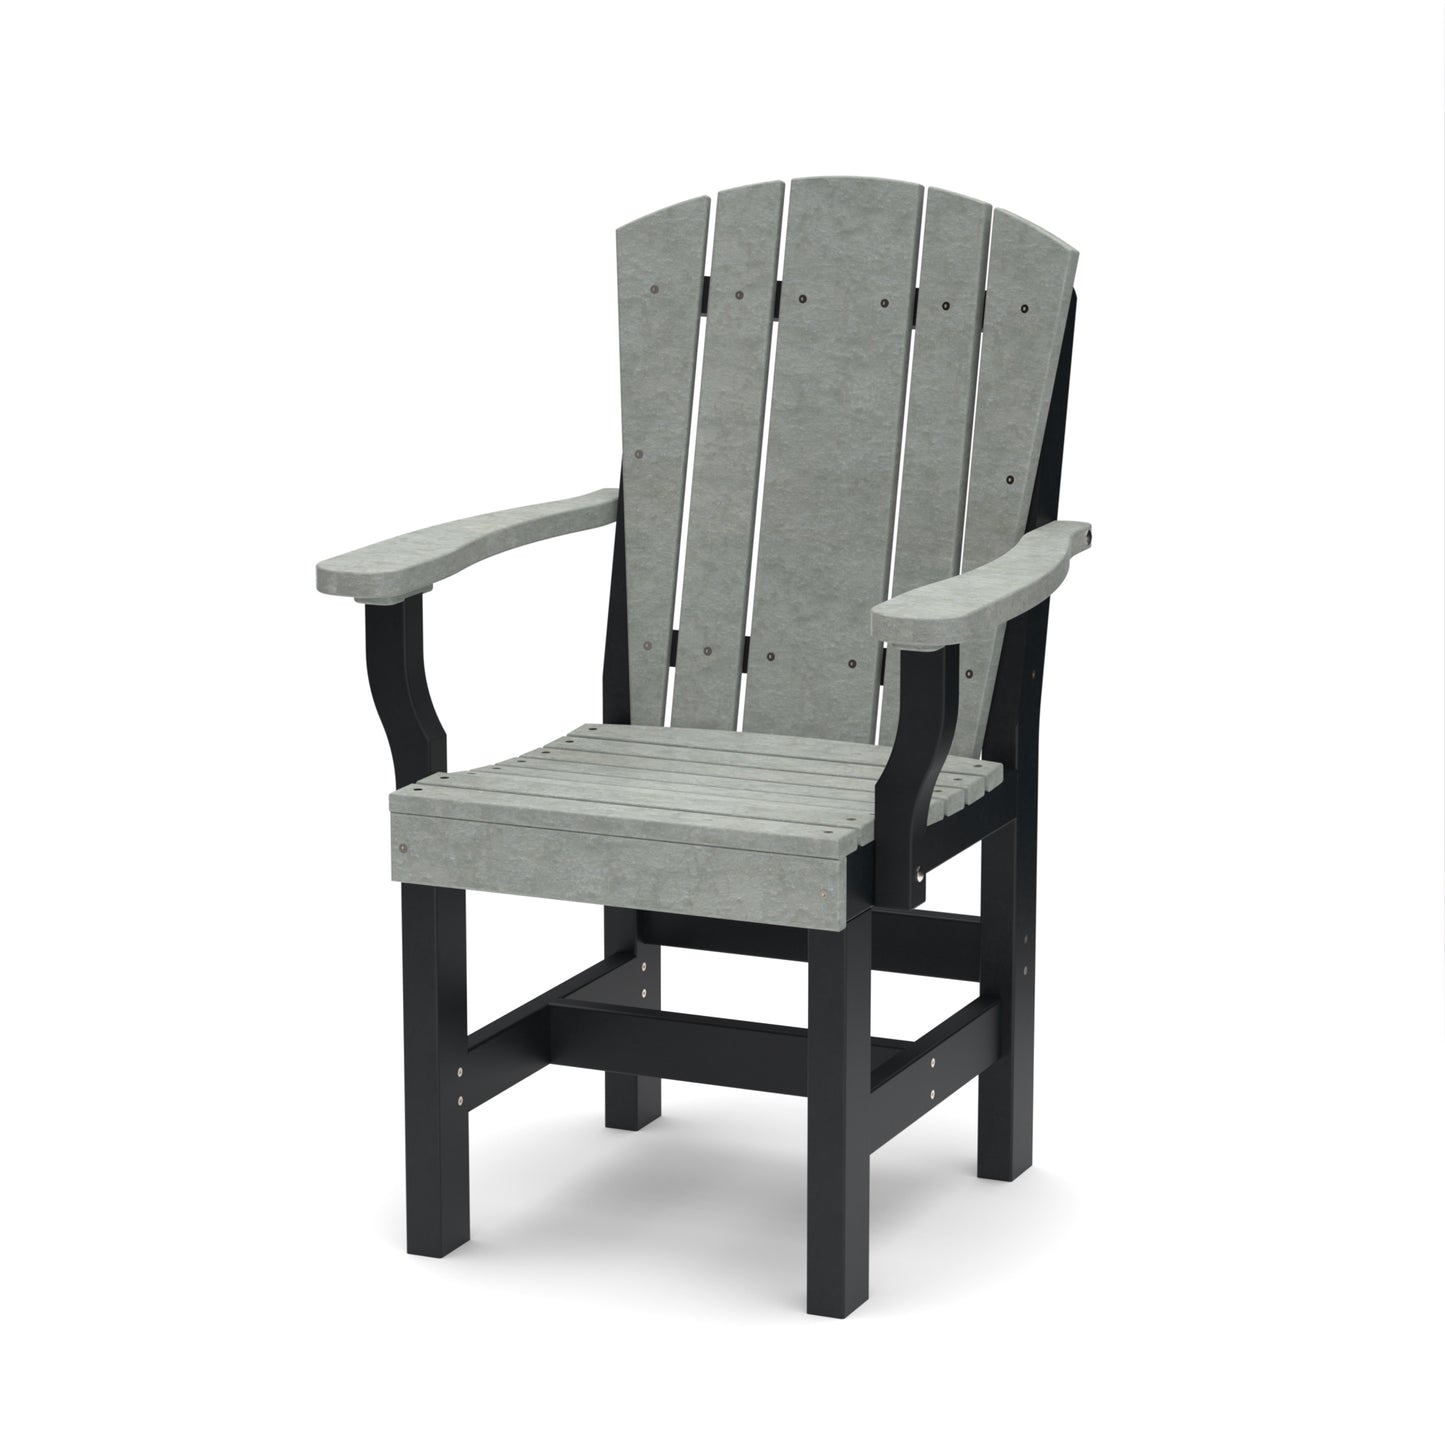 Wildridge Recycled Plastic Heritage Outdoor Dining Chair with Arms - LEAD TIME TO SHIP 6 WEEKS OR LESS